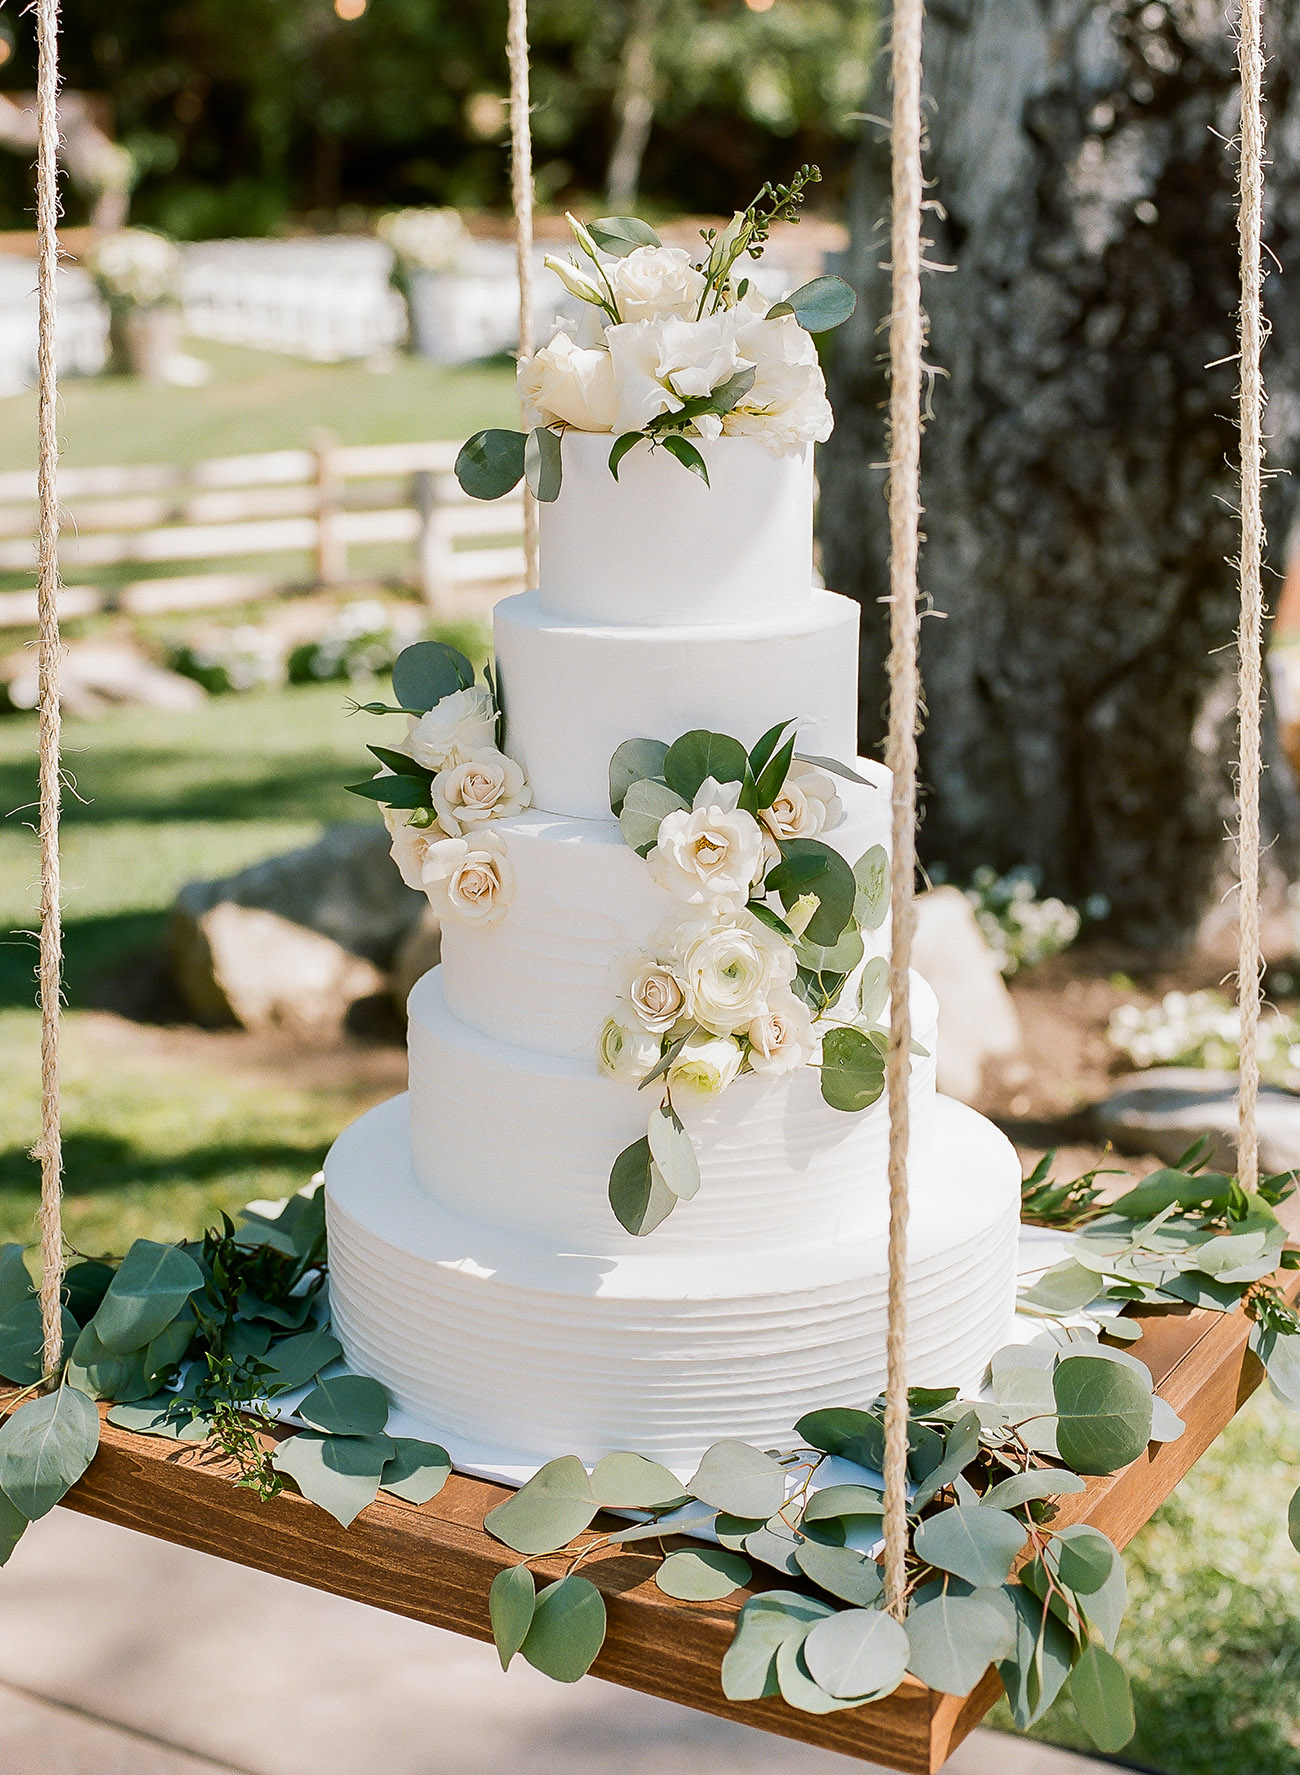 All white wedding cake, embellished with white flowers and greenery eucalyptus on a hanging swing display. // Jaw-dropping suspended cake display ideas for your wedding day. // mysweetengagement.com